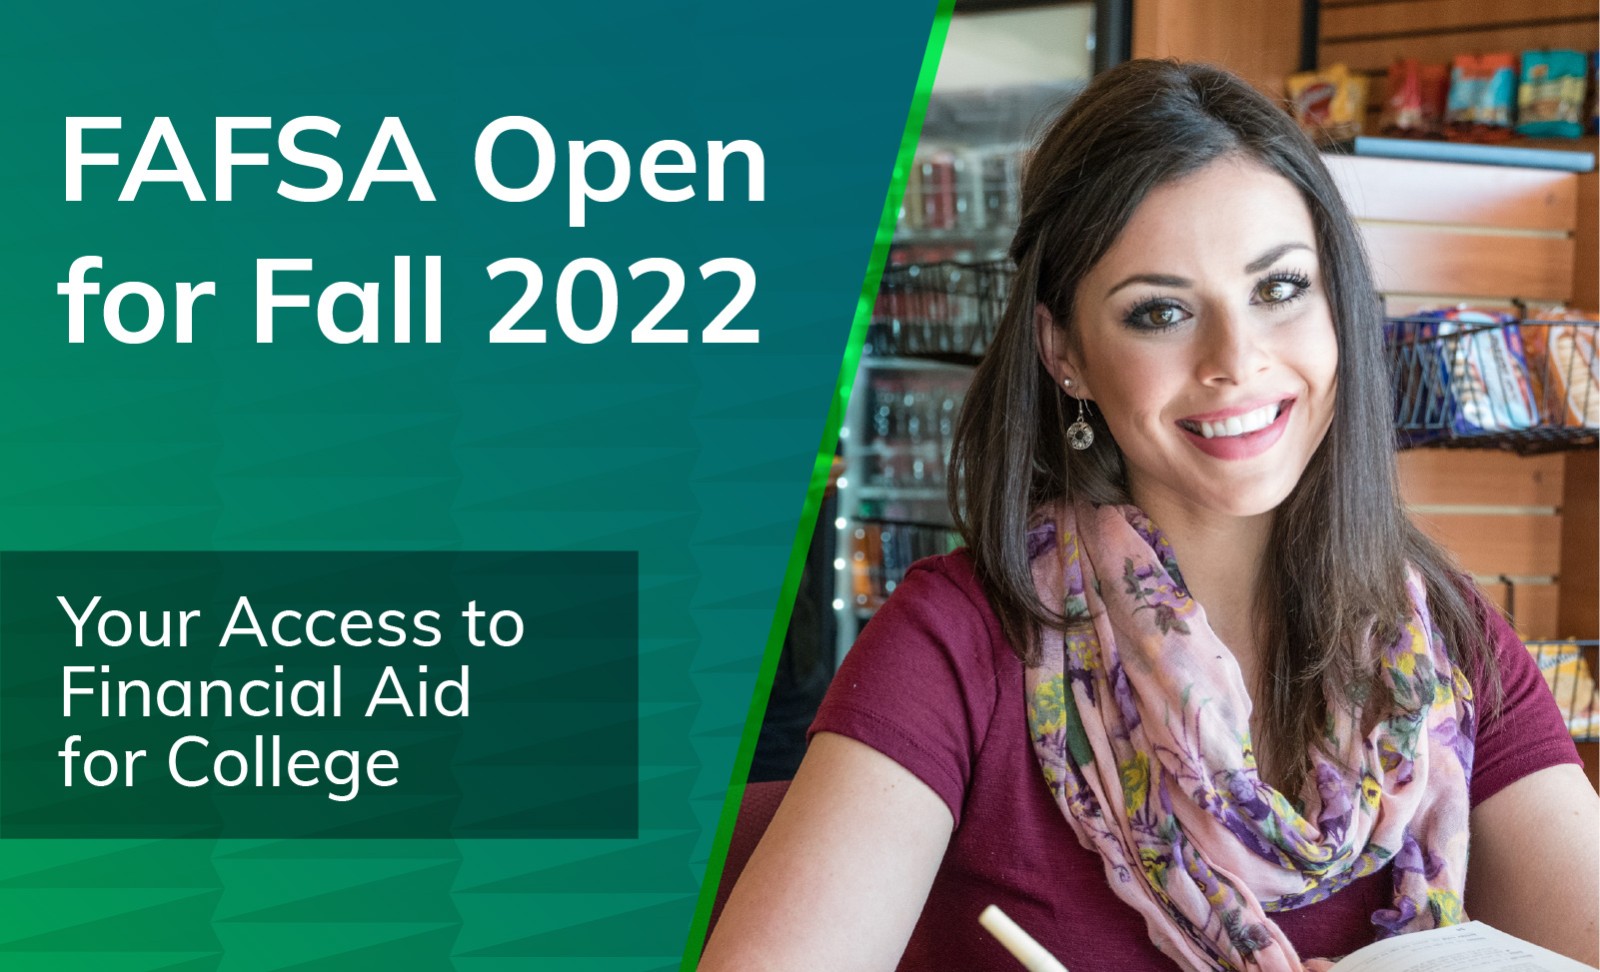 FAFSA Open for Fall 2022. Girl completing her FAFSA